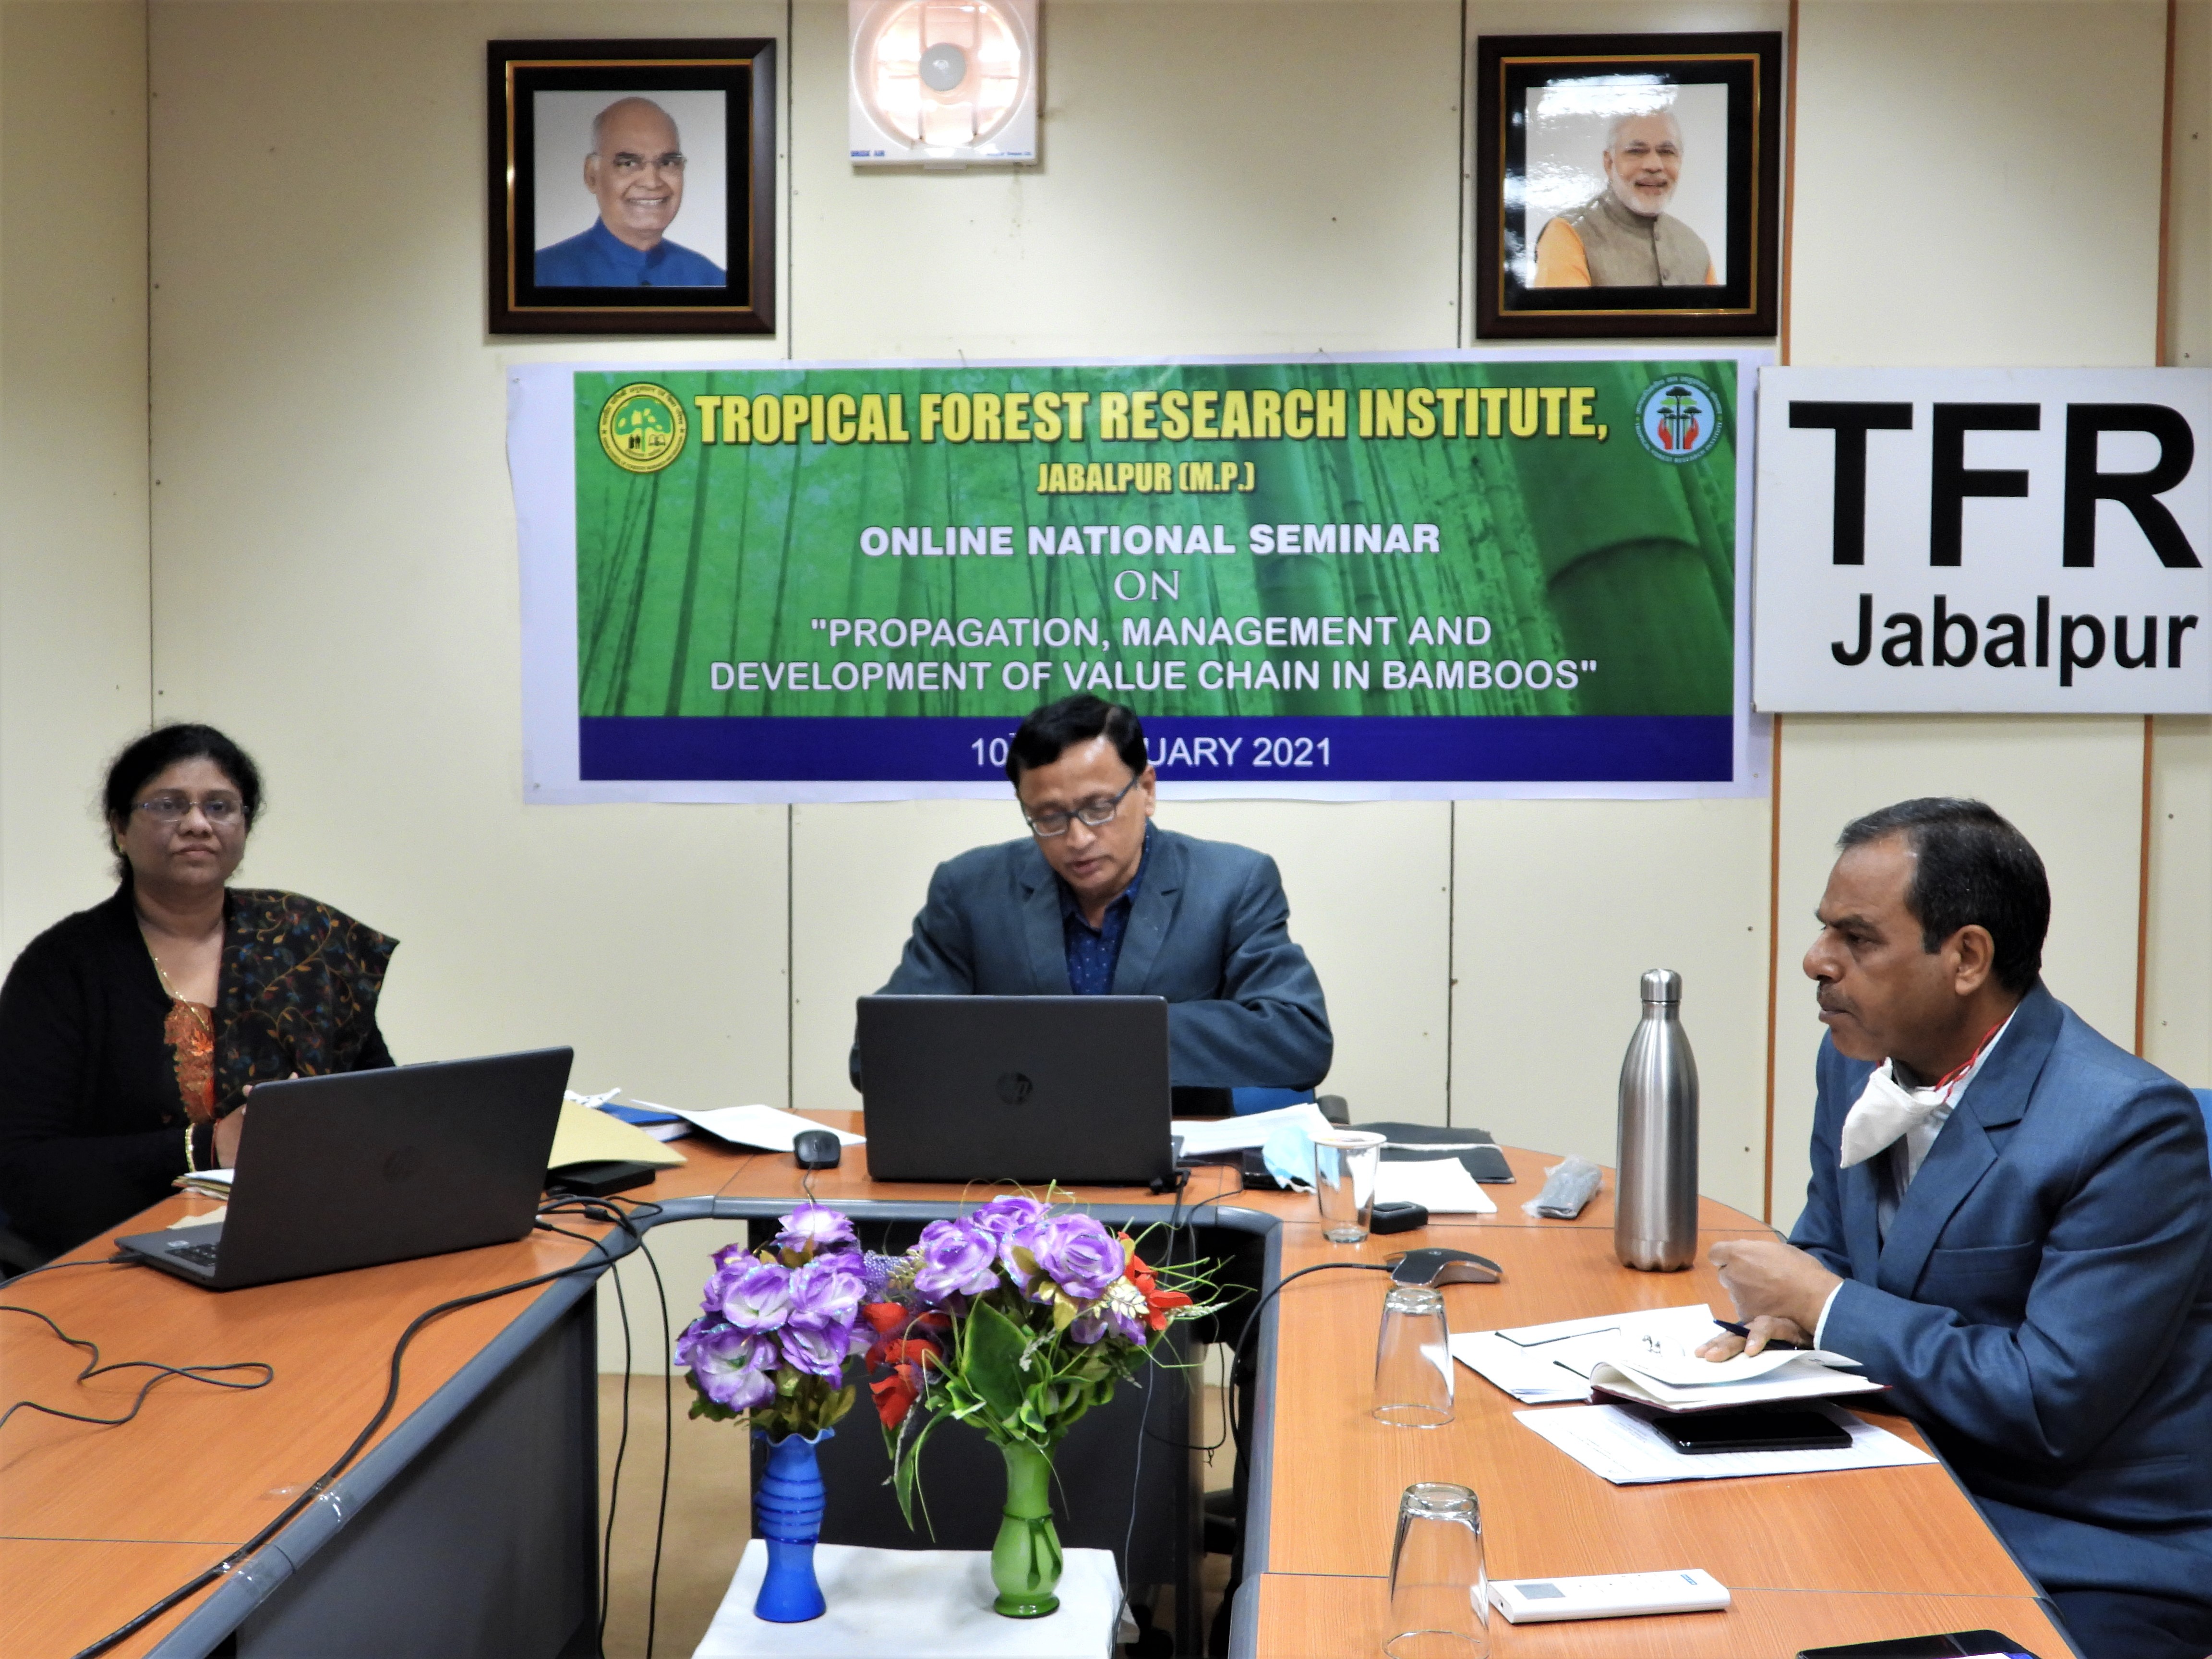 Online National Seminar on Propagation, Management and development of value chain in bamboos.